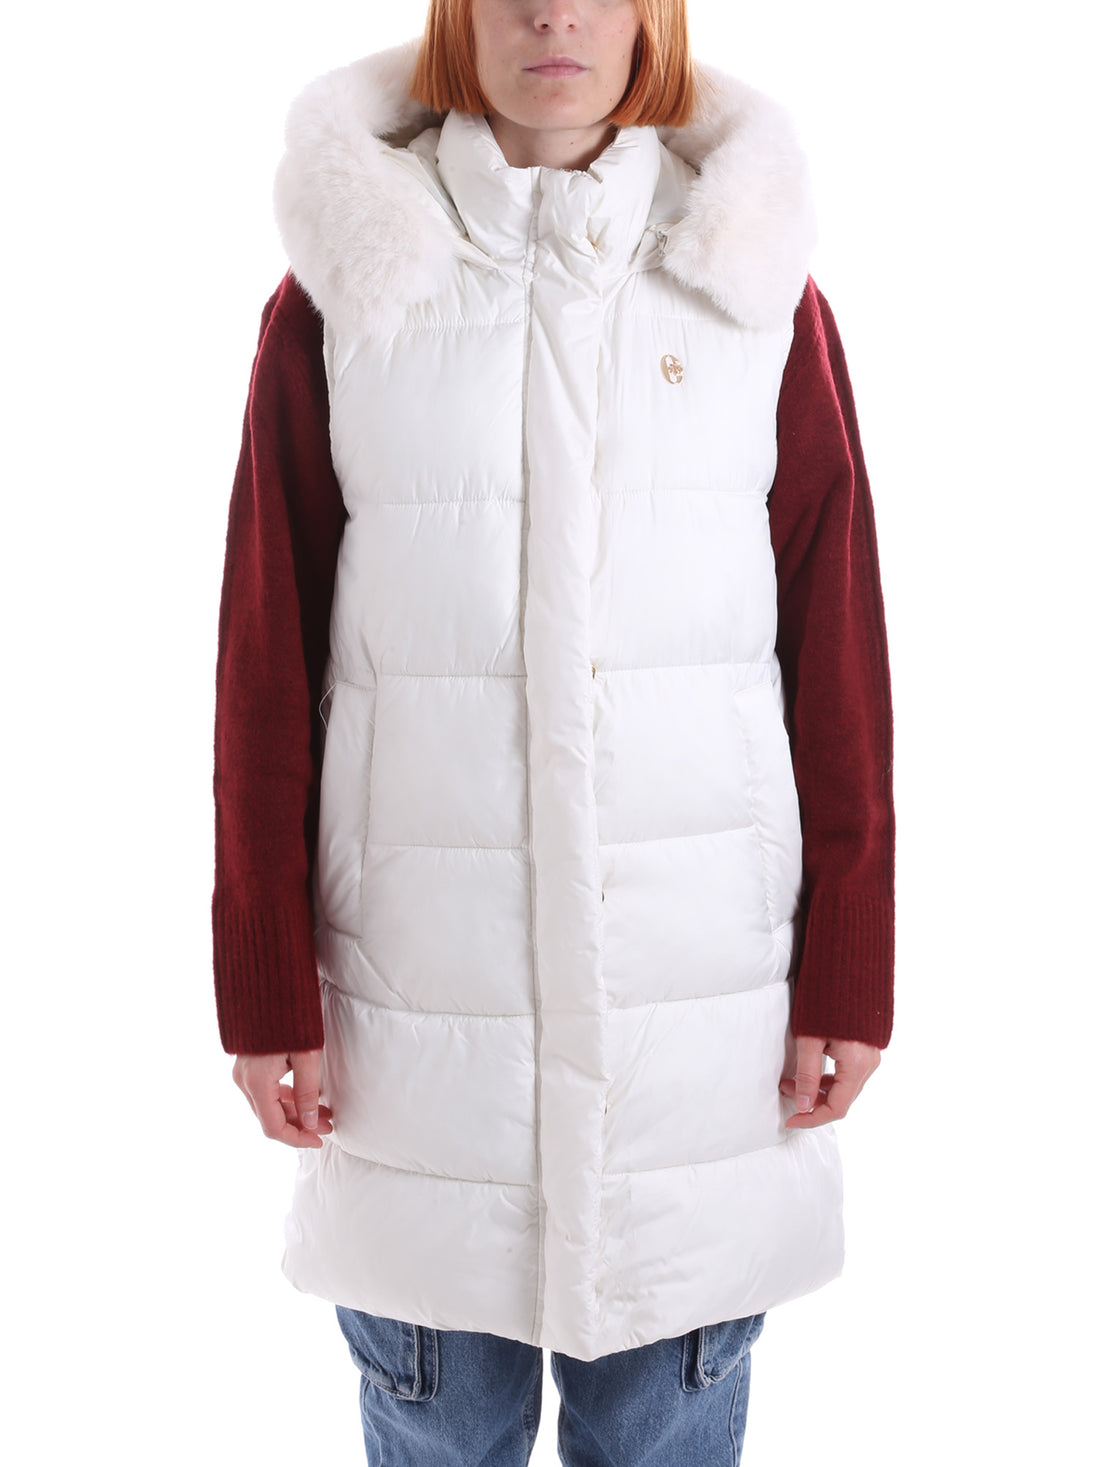 Gilet Bianco Conte Of Florence